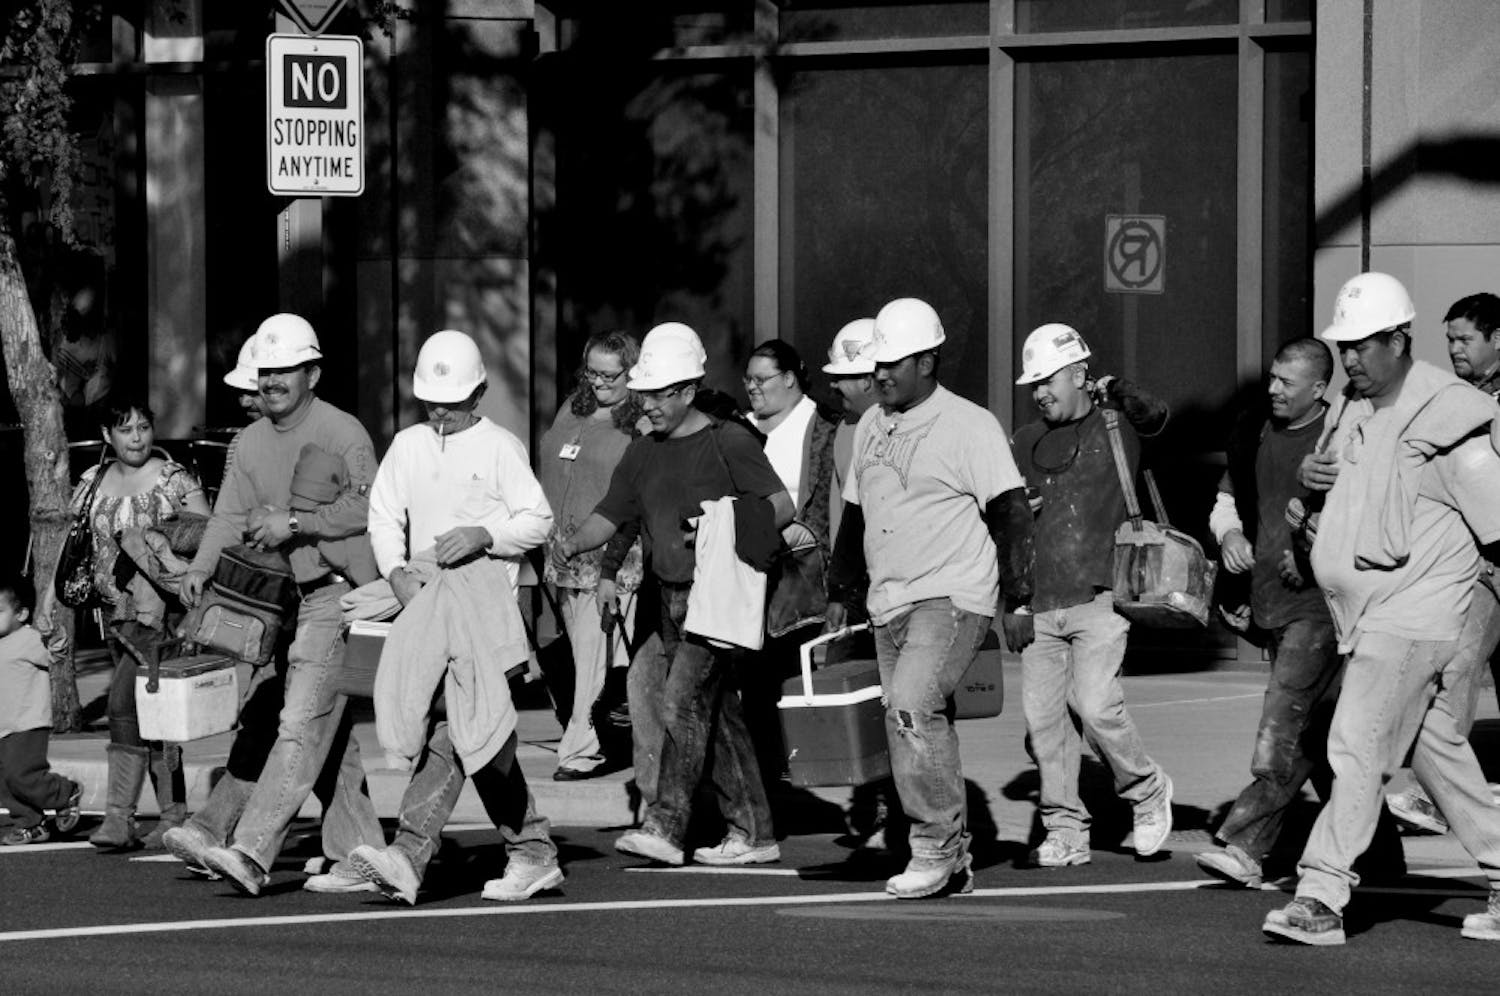 LUNCH BREAK: Construction workers head back to duty after lunch. There are a variety of construction projects around the Downtown campus including Central Park East, a new office building that will be erected by University Center. (Photo by Sierra Smith)